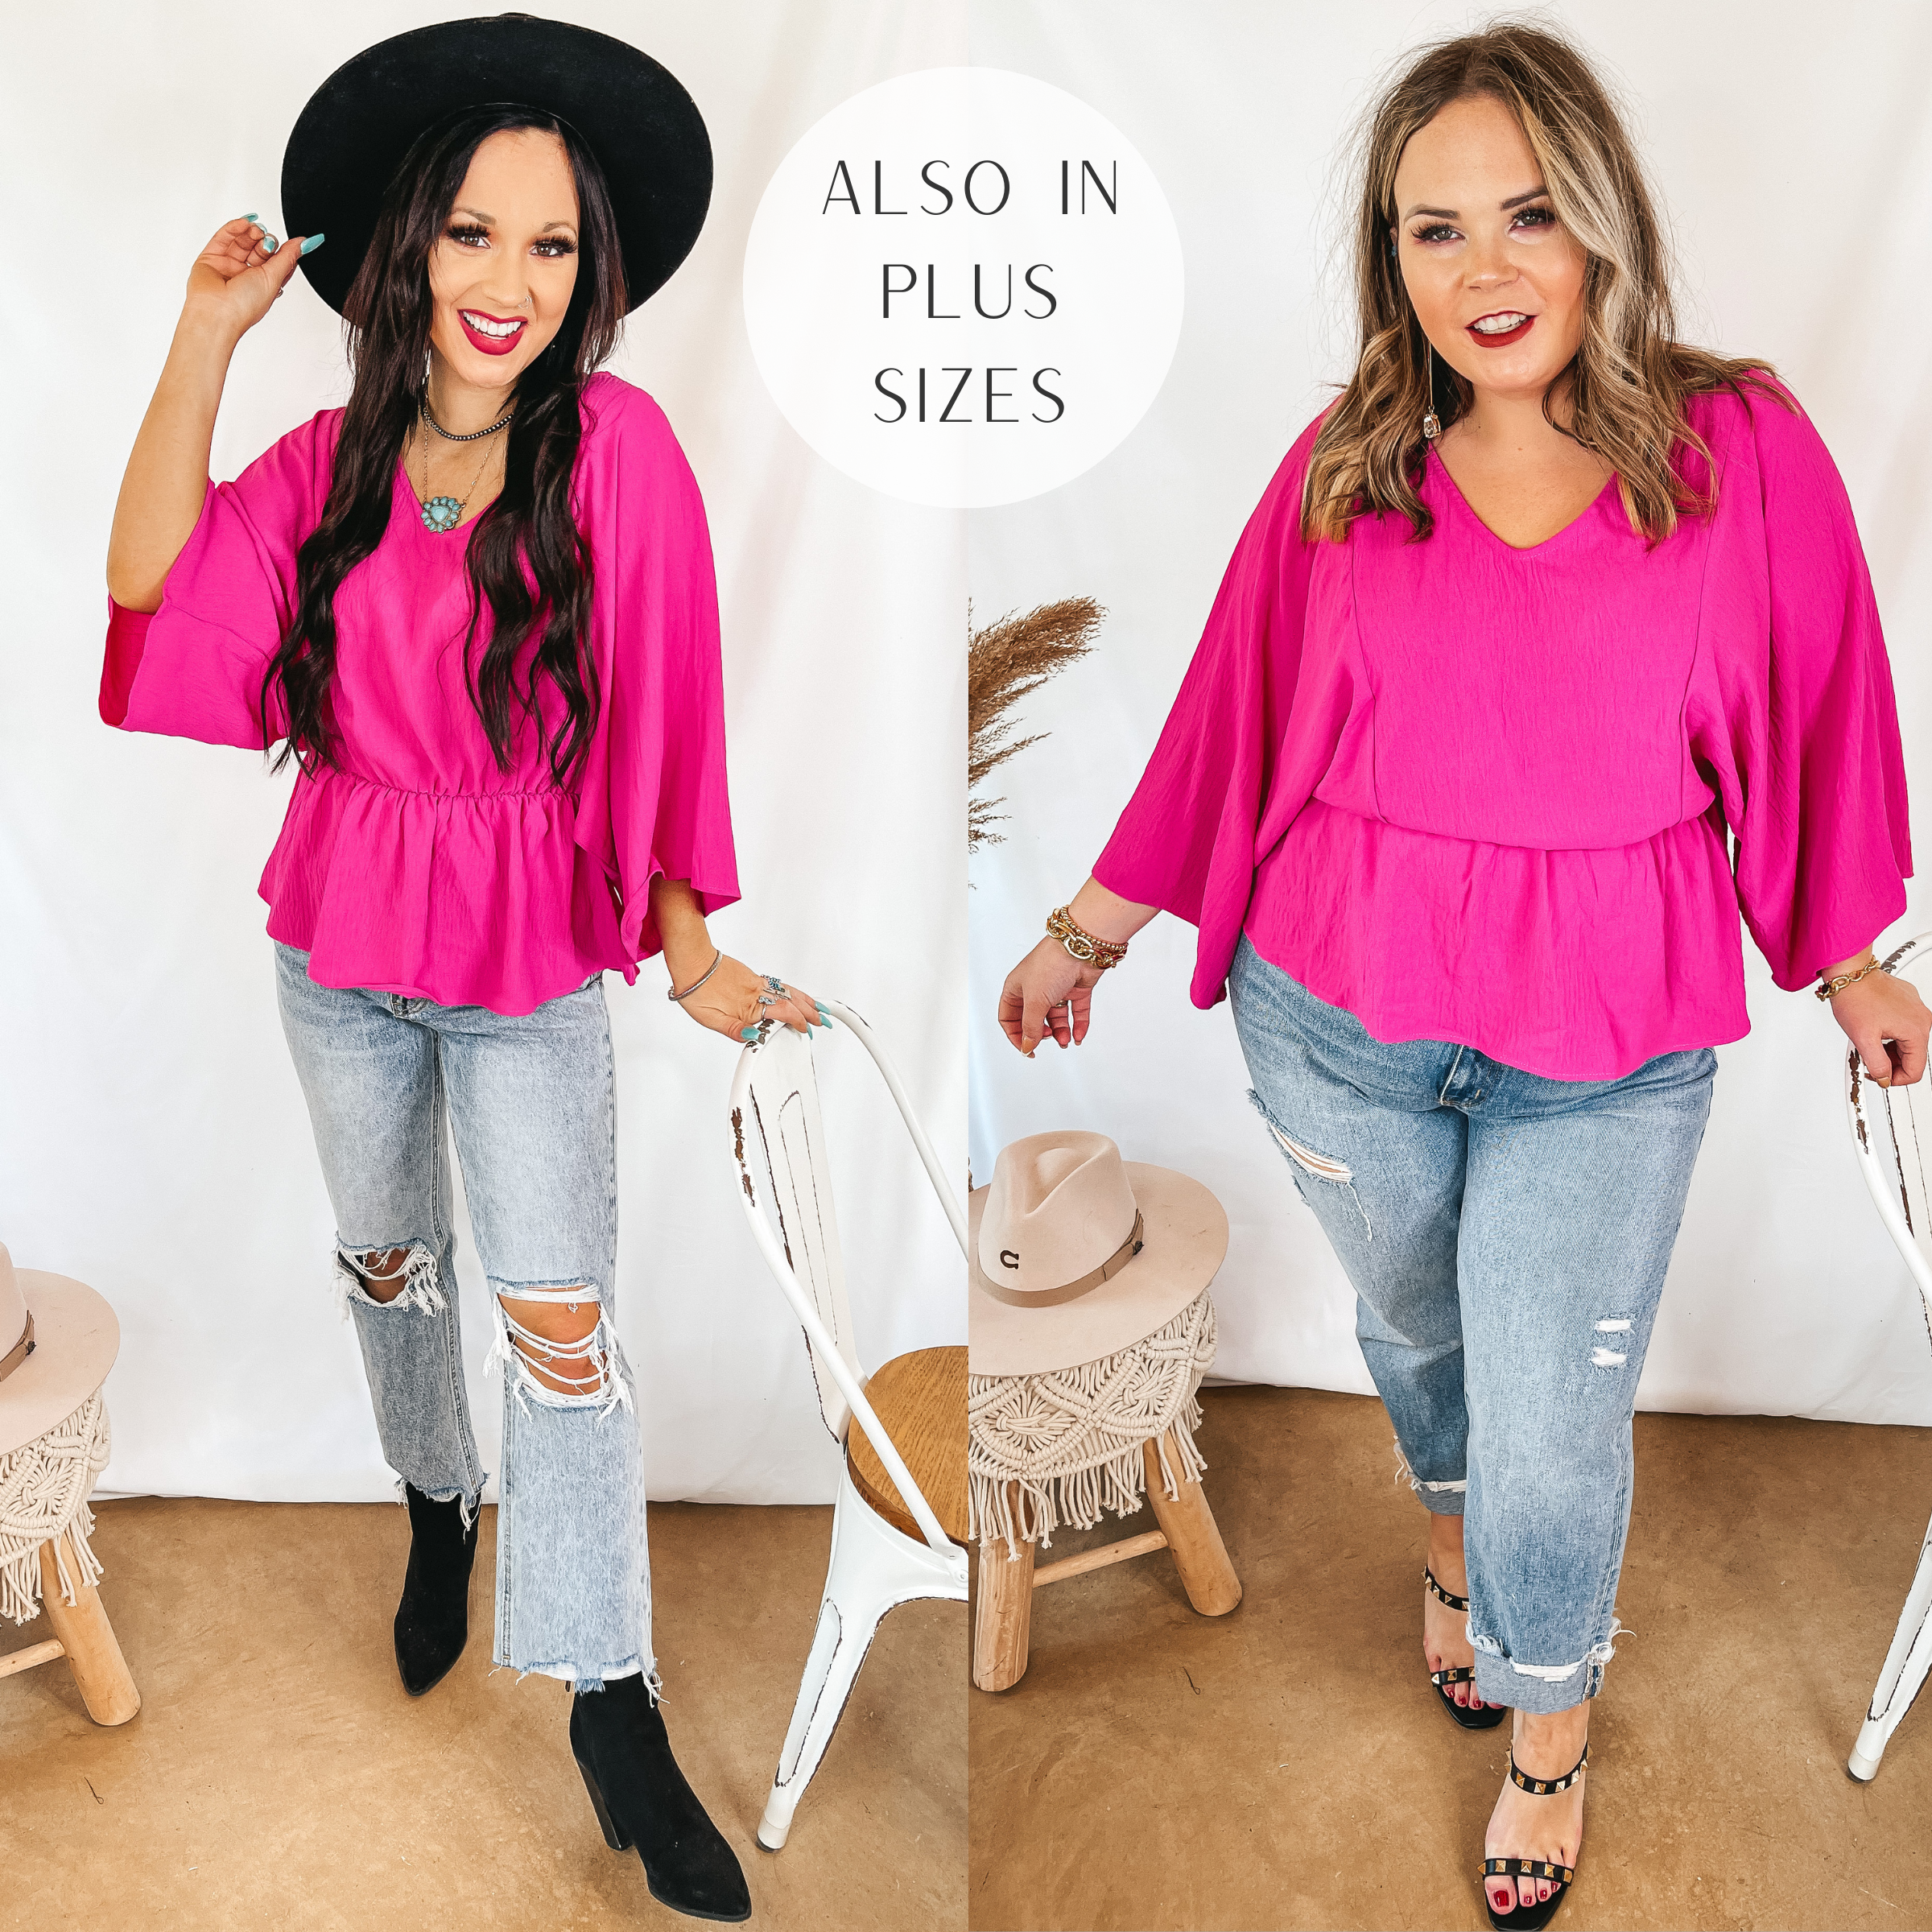 Models are wearing a flowy sleeve hot pink peplum top. Both models have it paired with light wash jeans. Size small model has it paired with black booties and a black hat. Size large model has it paired with black heels and silver jewelry.